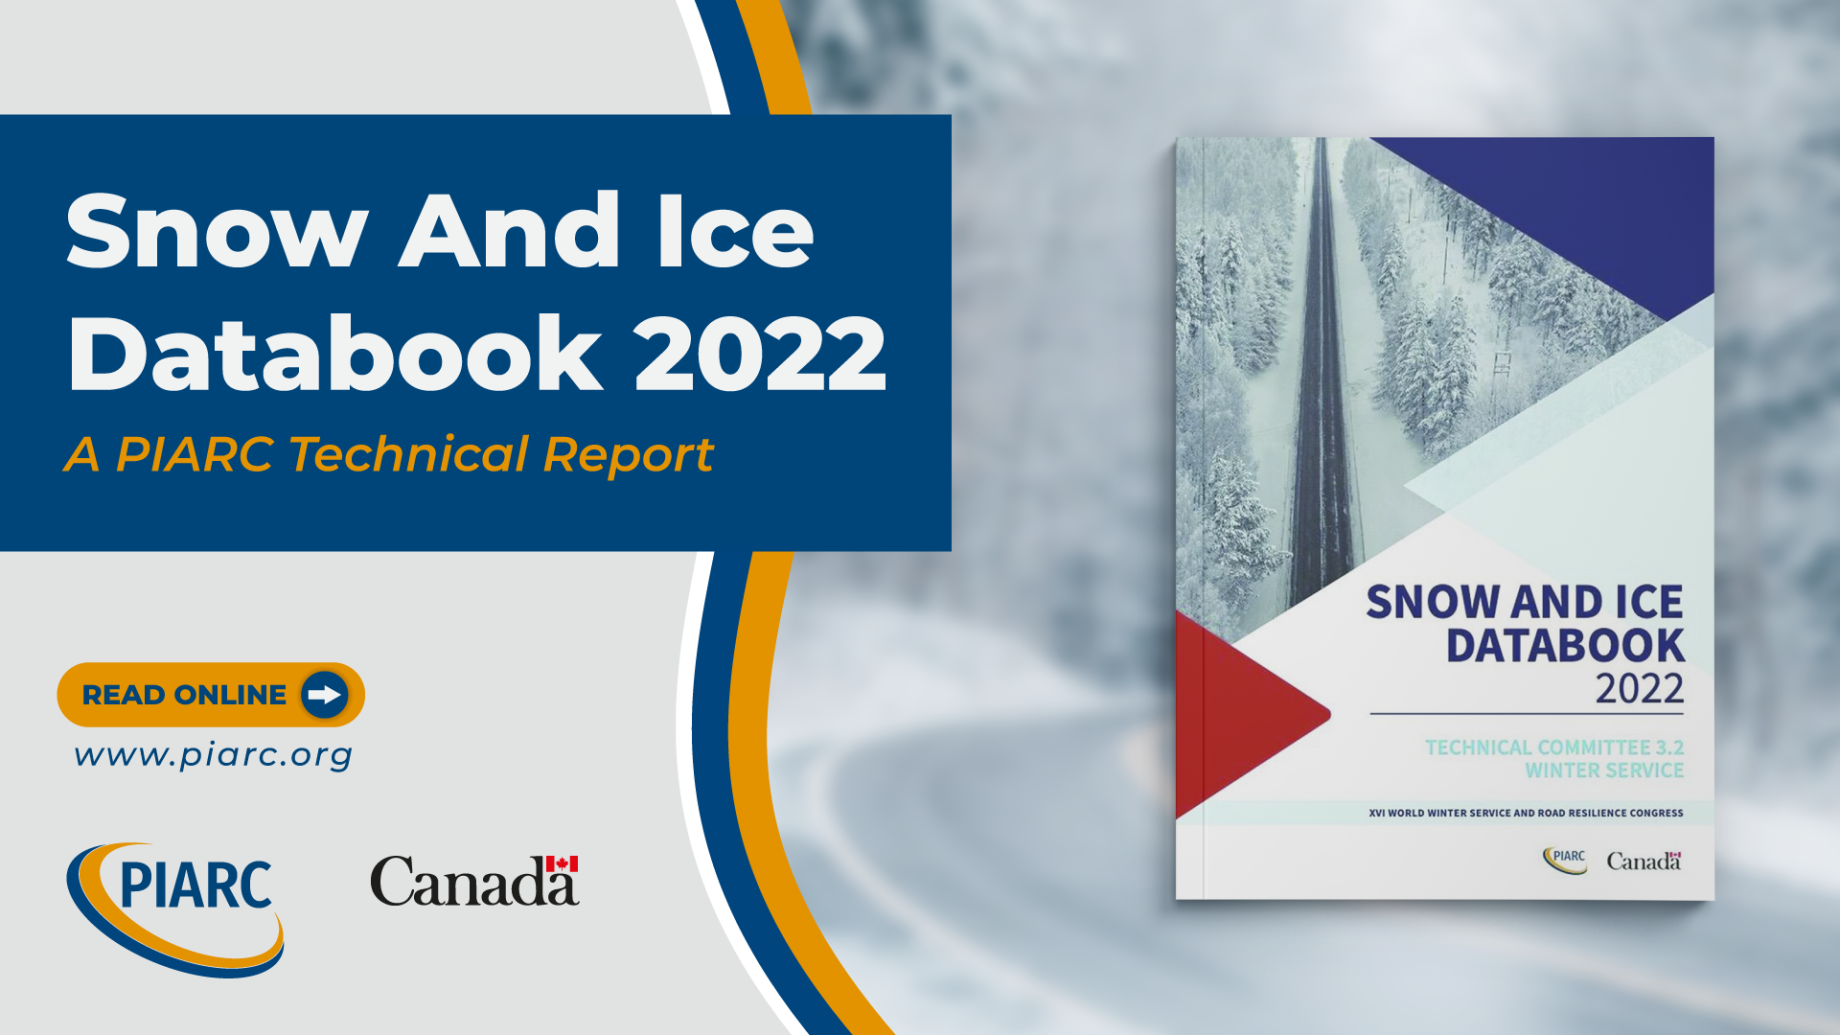 The new
edition of PIARC’s Snow and Ice Databook is now available! Download it to get
the latest data on winter road service management!